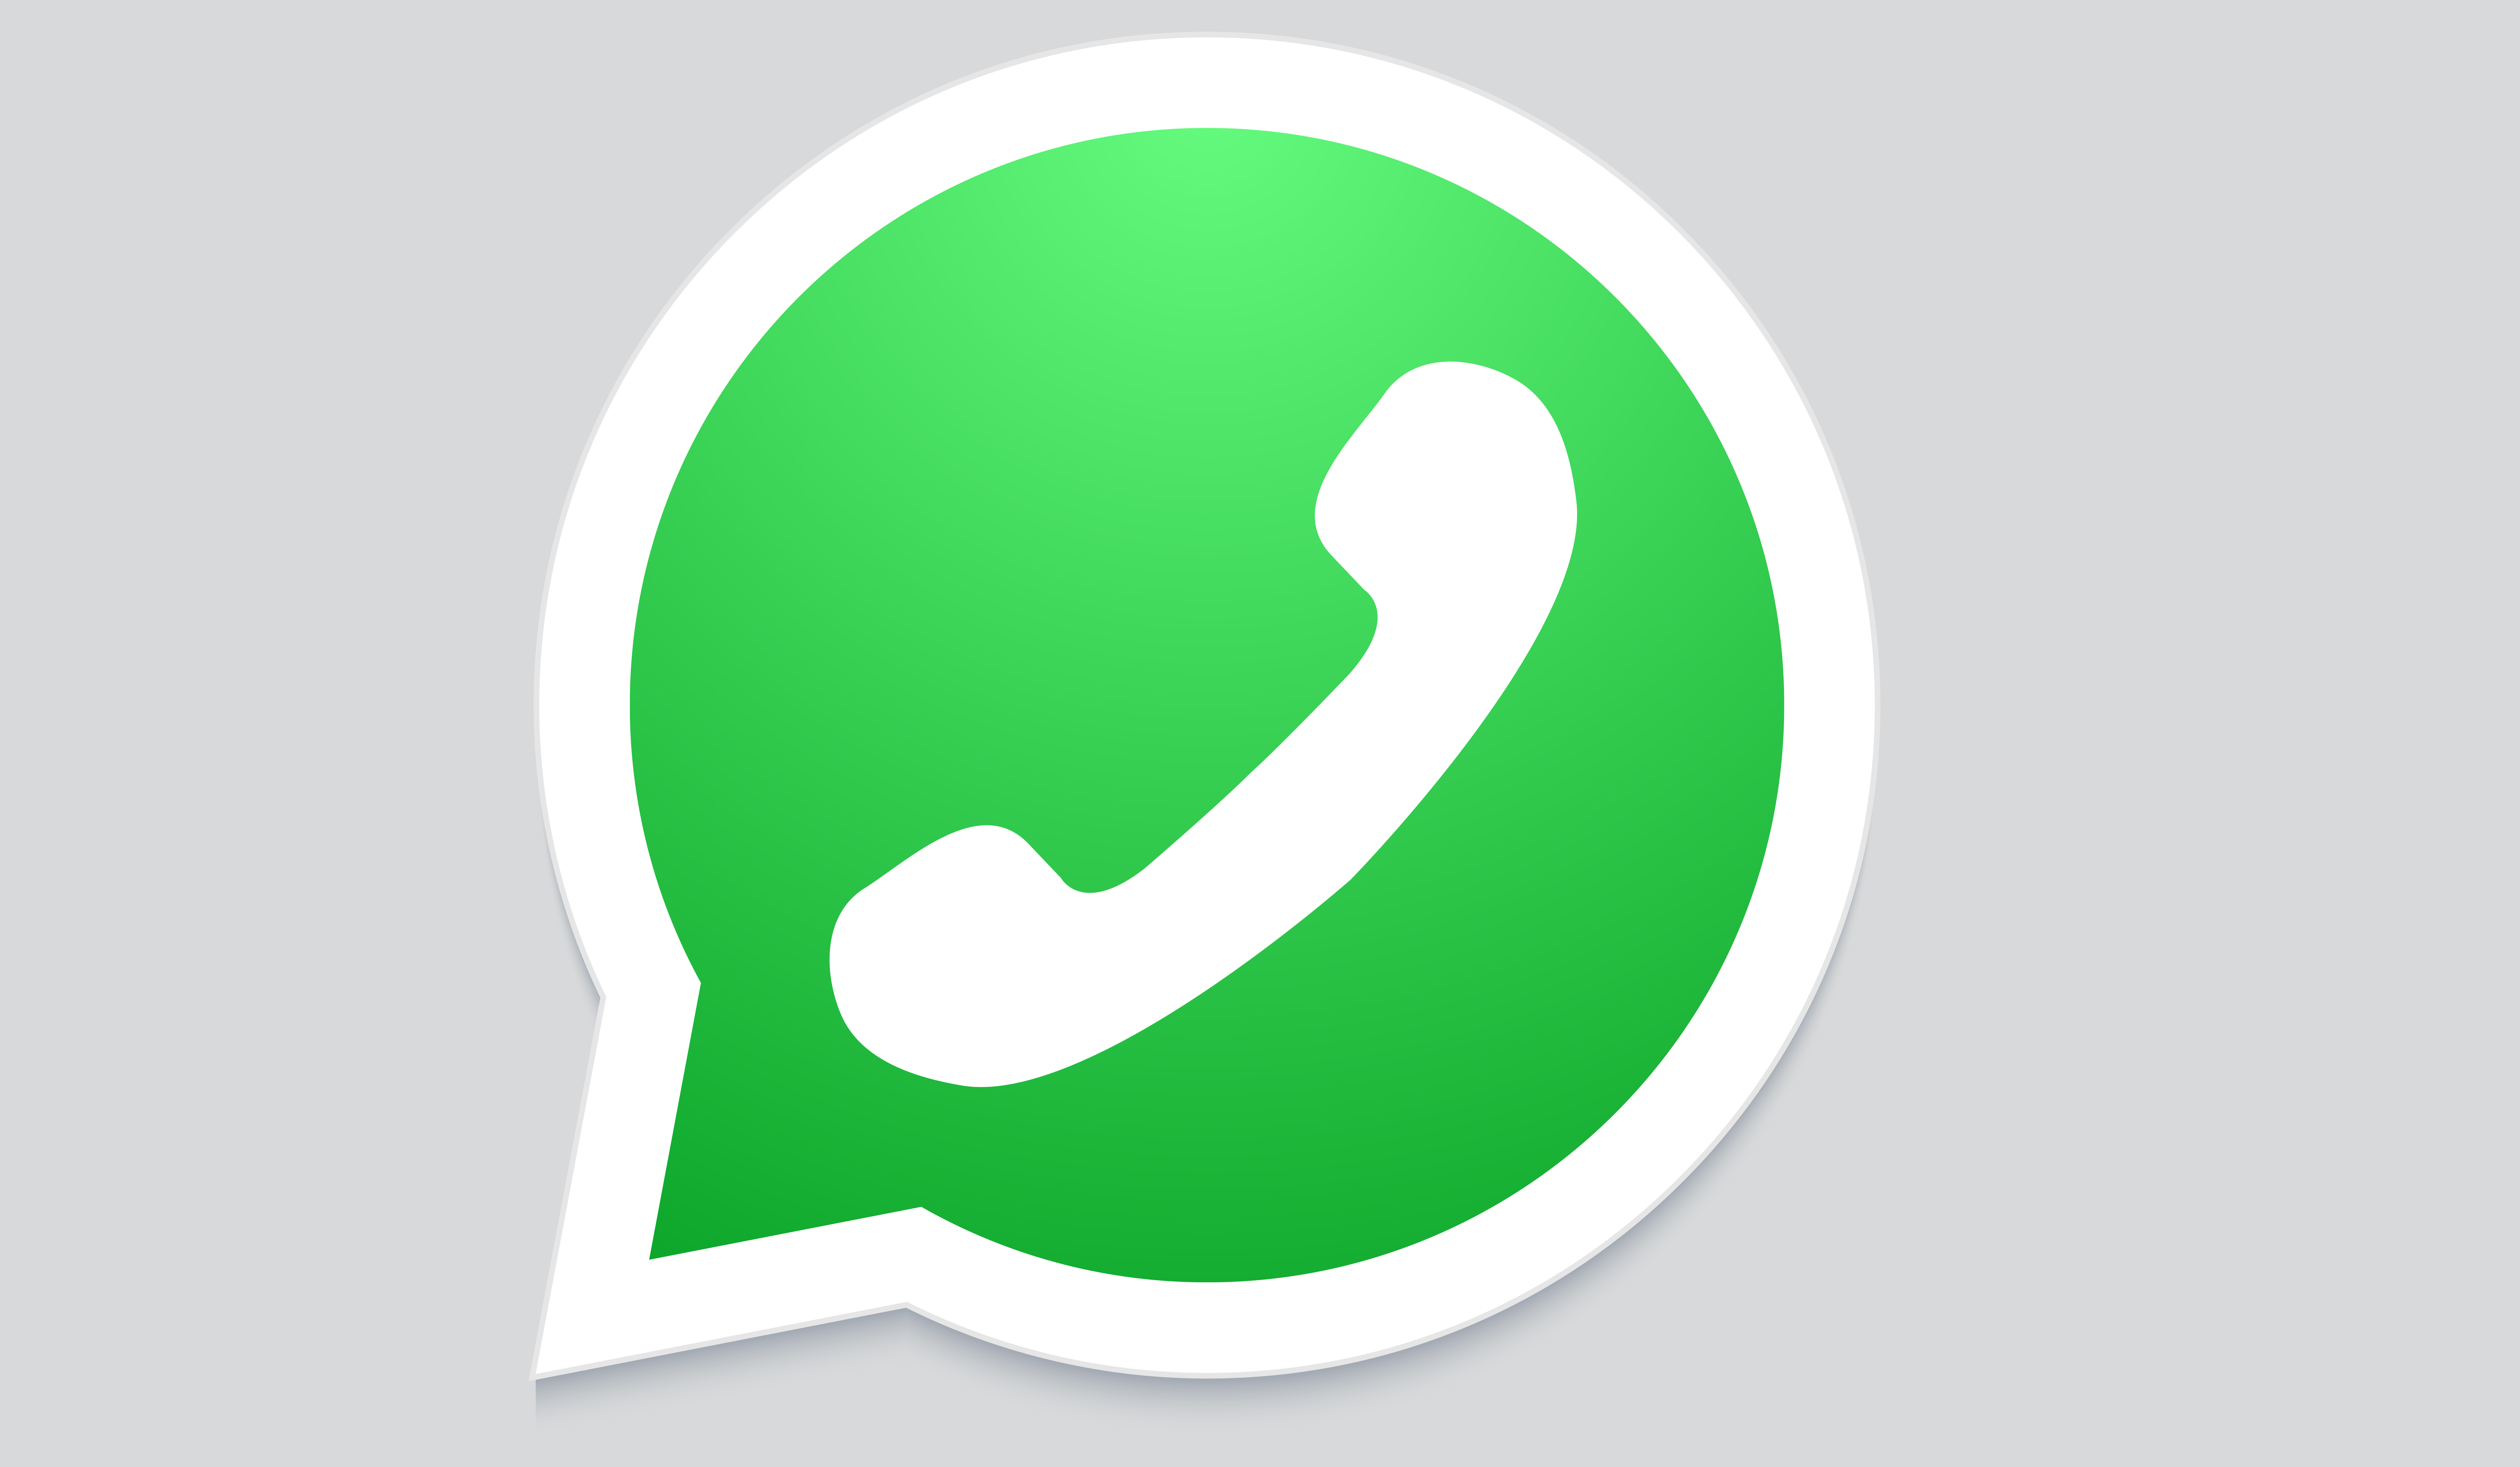 Whatsapp HD PNG Transparent Whatsapp HD.PNG Images. | PlusPNG